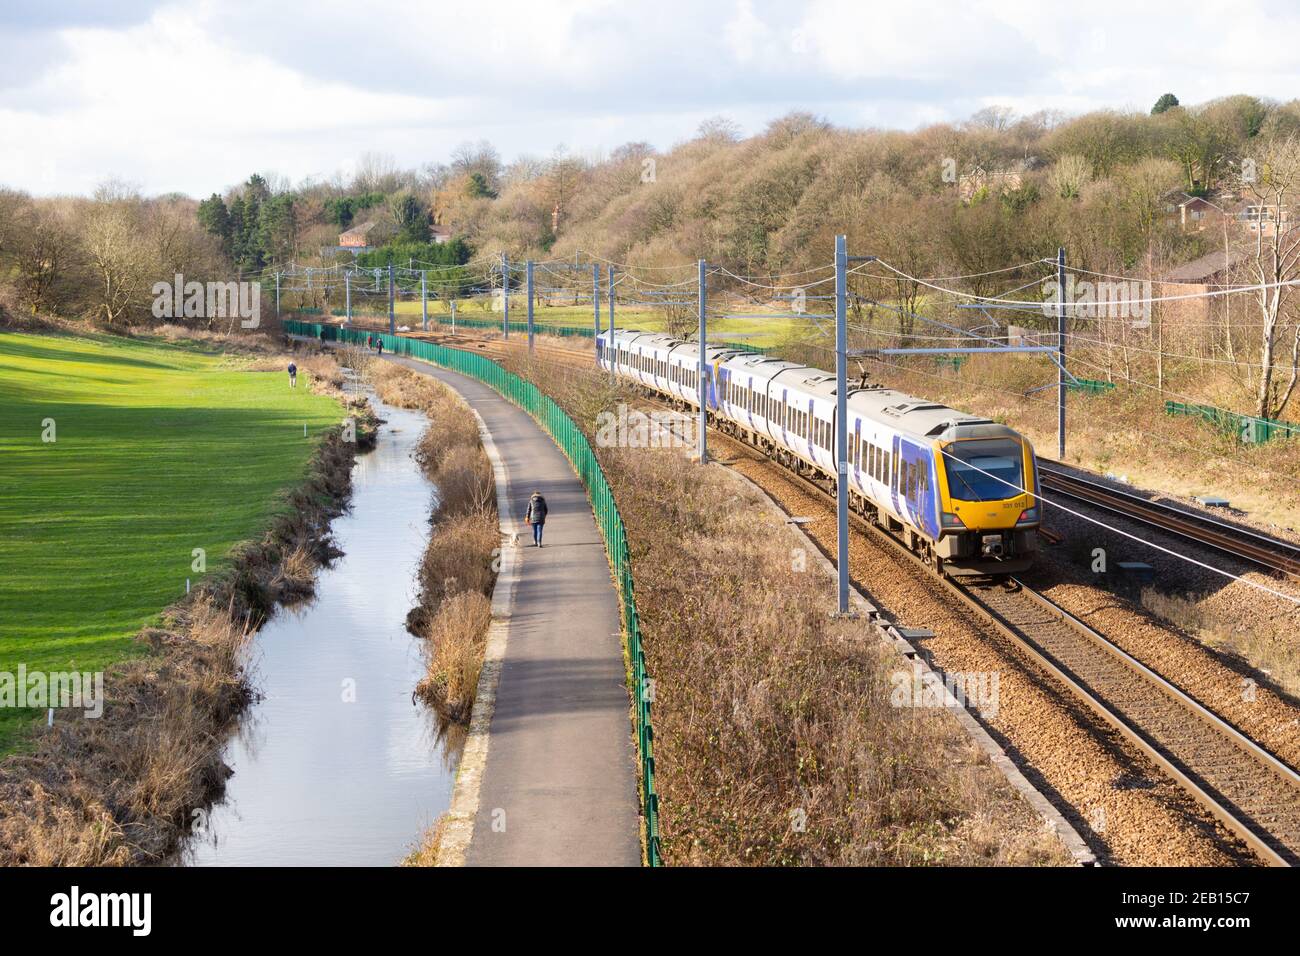 British Rail Class 331 Civity train made up of two 3 car sets with 331 012 in view at the Middlebrook Valley Trail heading towards Lostock. Bolton, UK Stock Photo